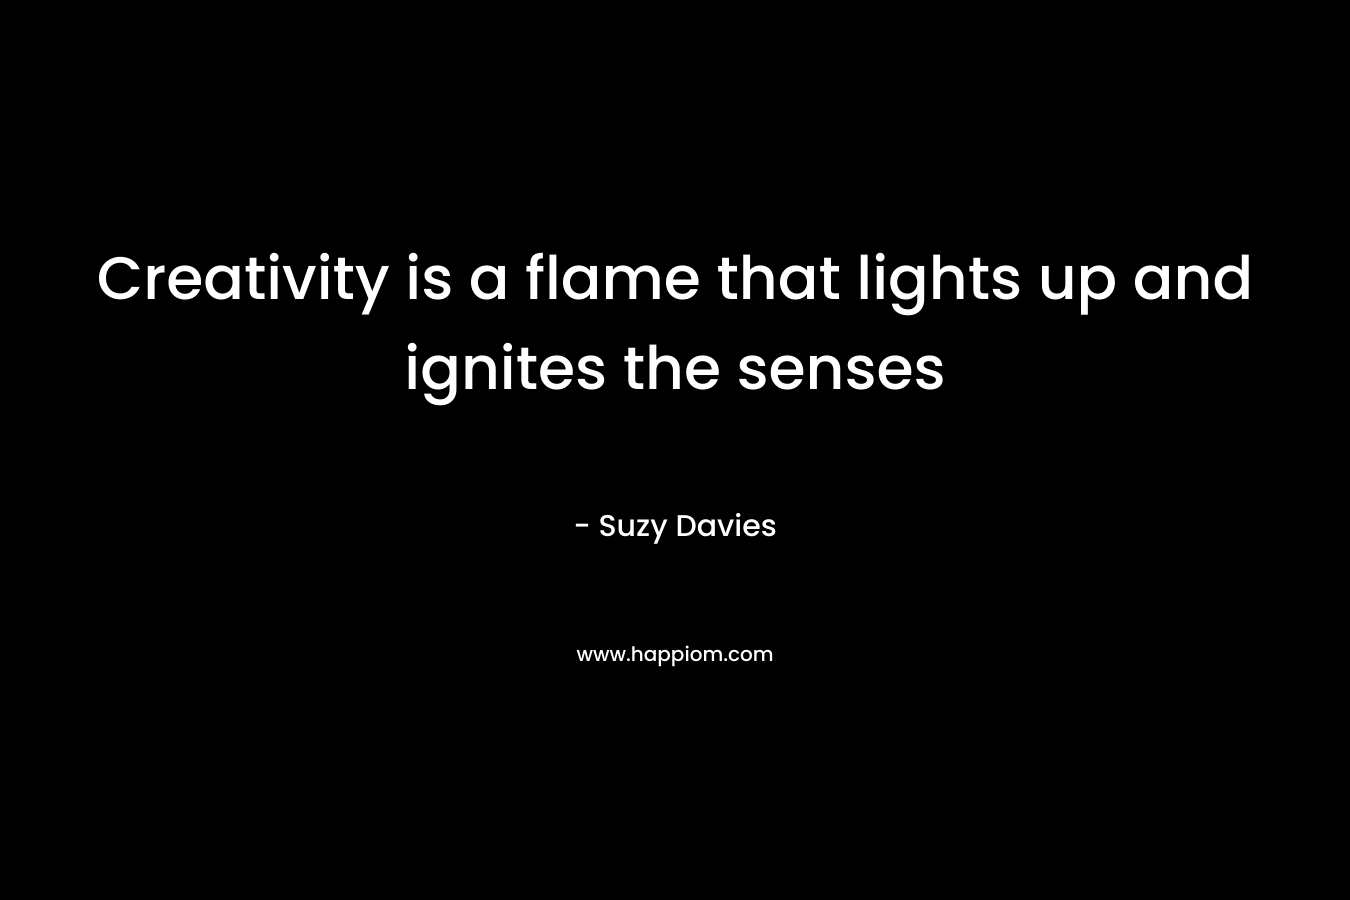 Creativity is a flame that lights up and ignites the senses